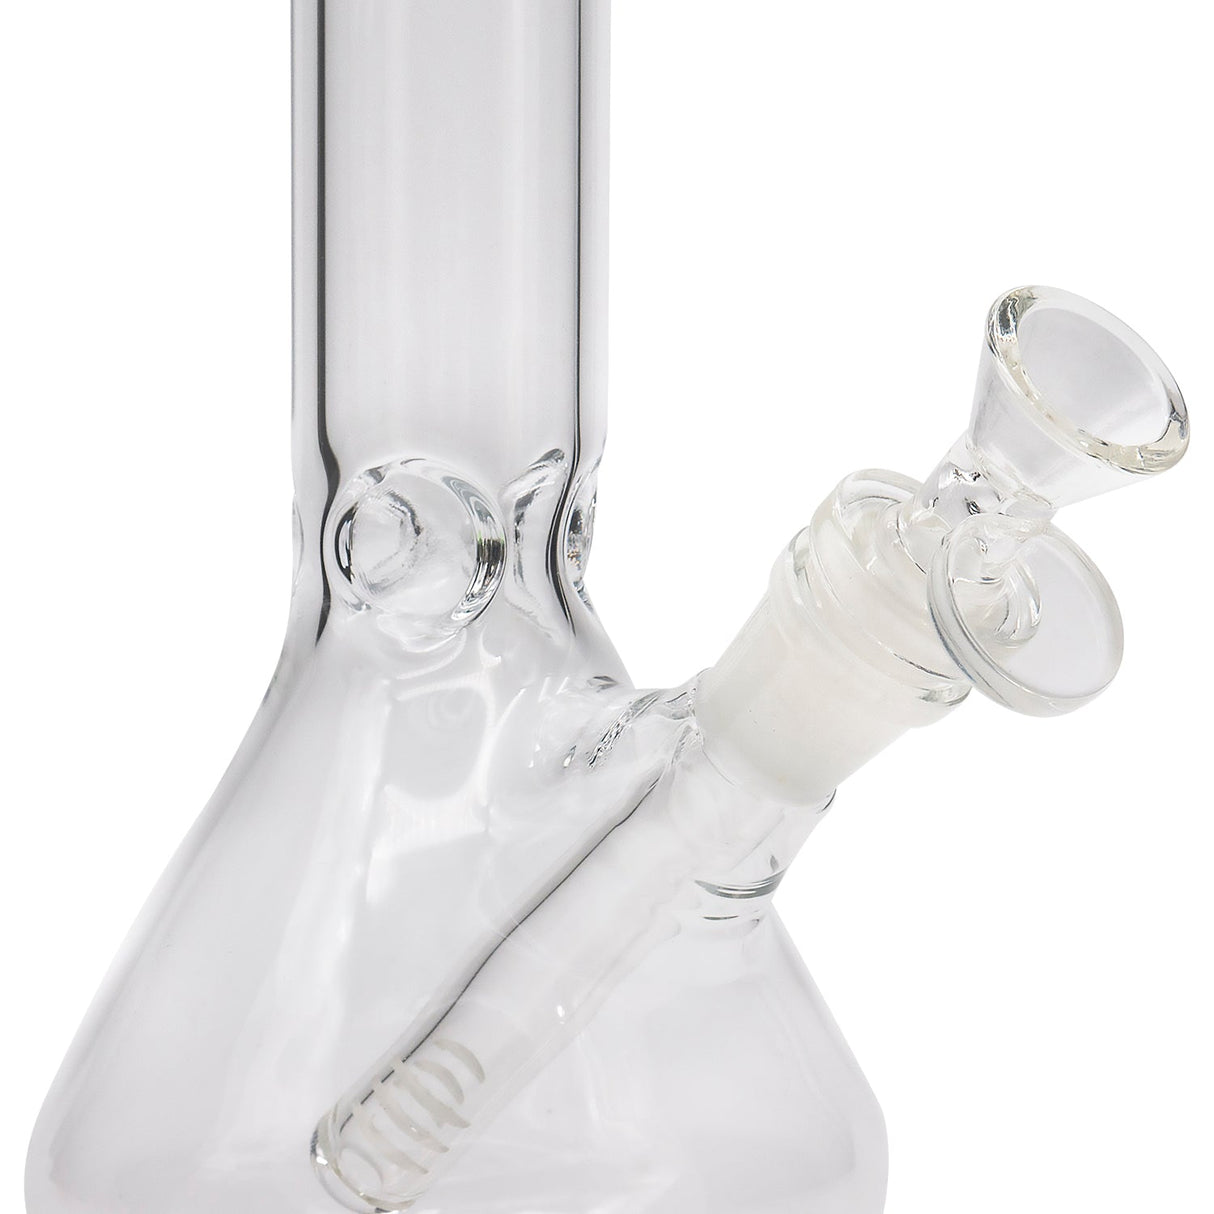 Close-up of LA Pipes 12" Classic Beaker Bong with clear borosilicate glass and removable downstem